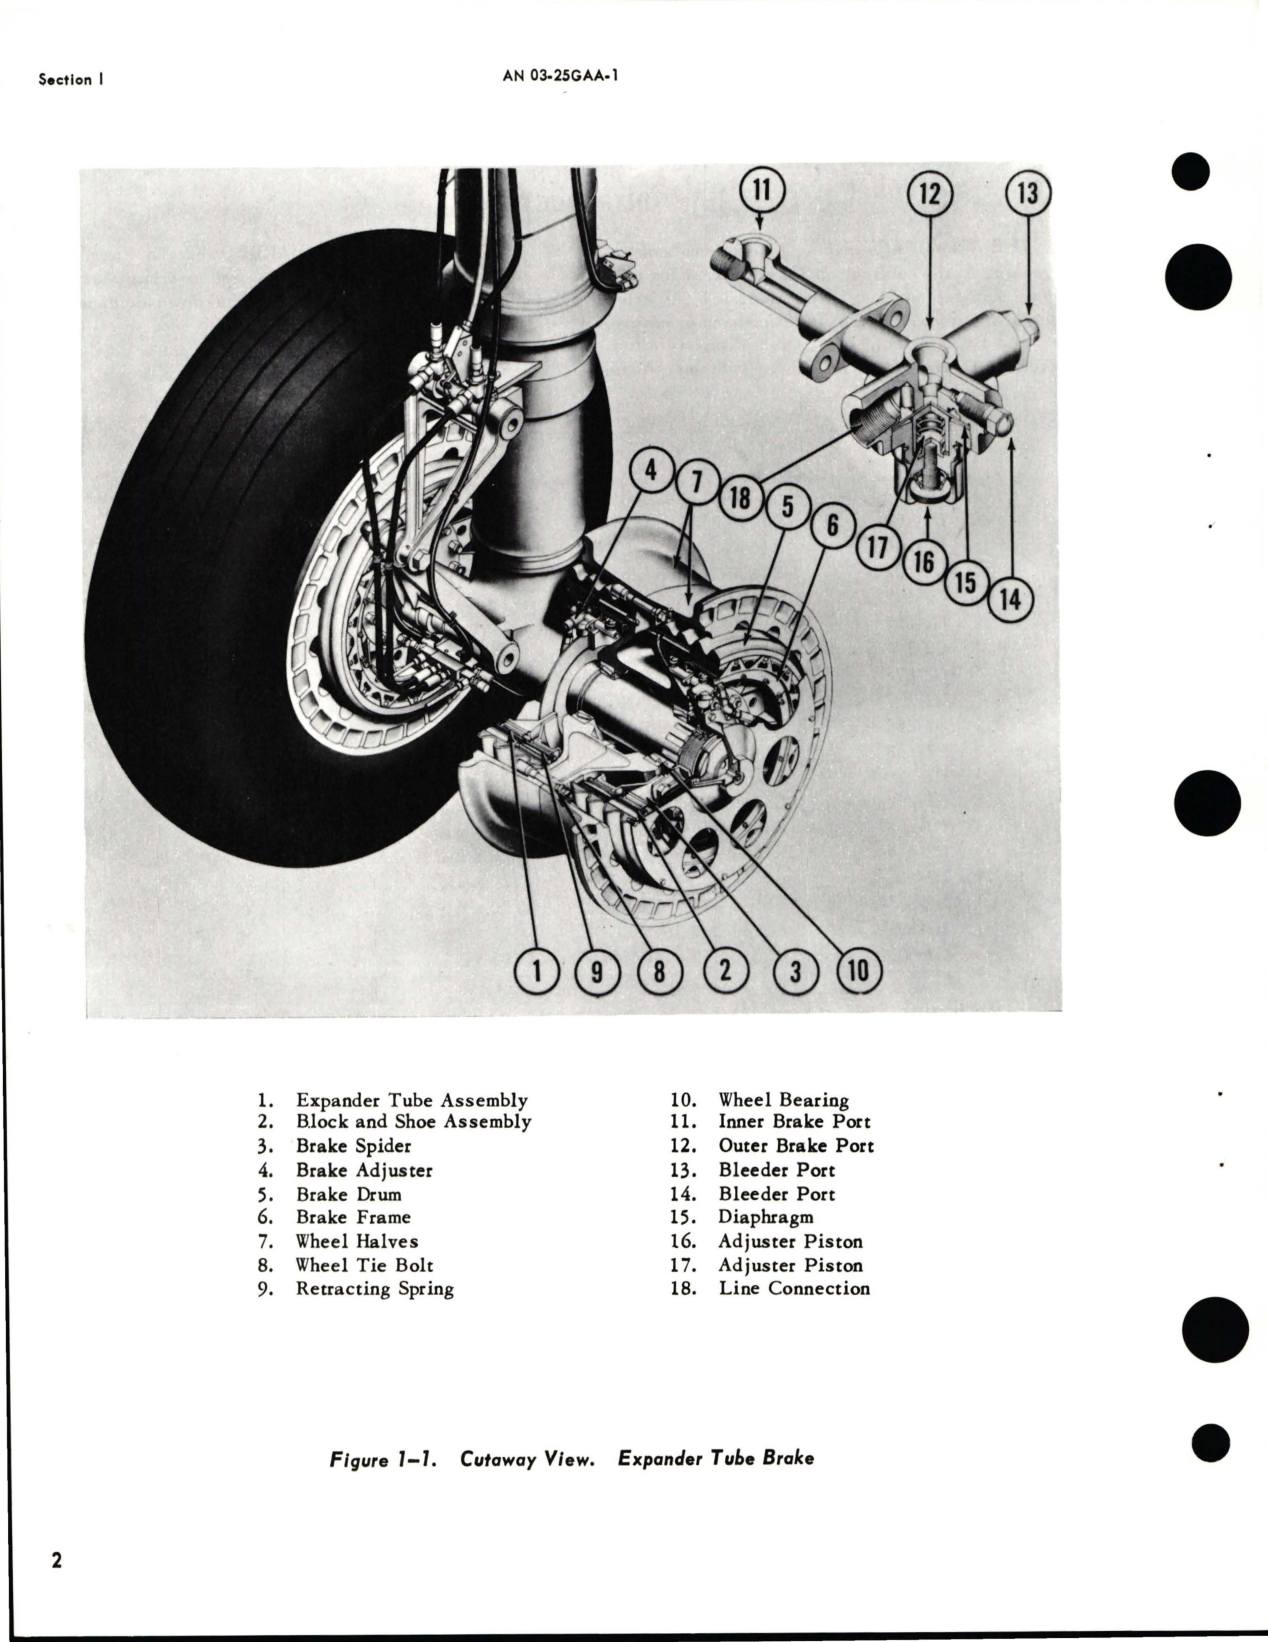 Sample page 6 from AirCorps Library document: Operation, Service and Overhaul Instructions with Illustrated Parts Breakdown for Expander Tube Brakes 